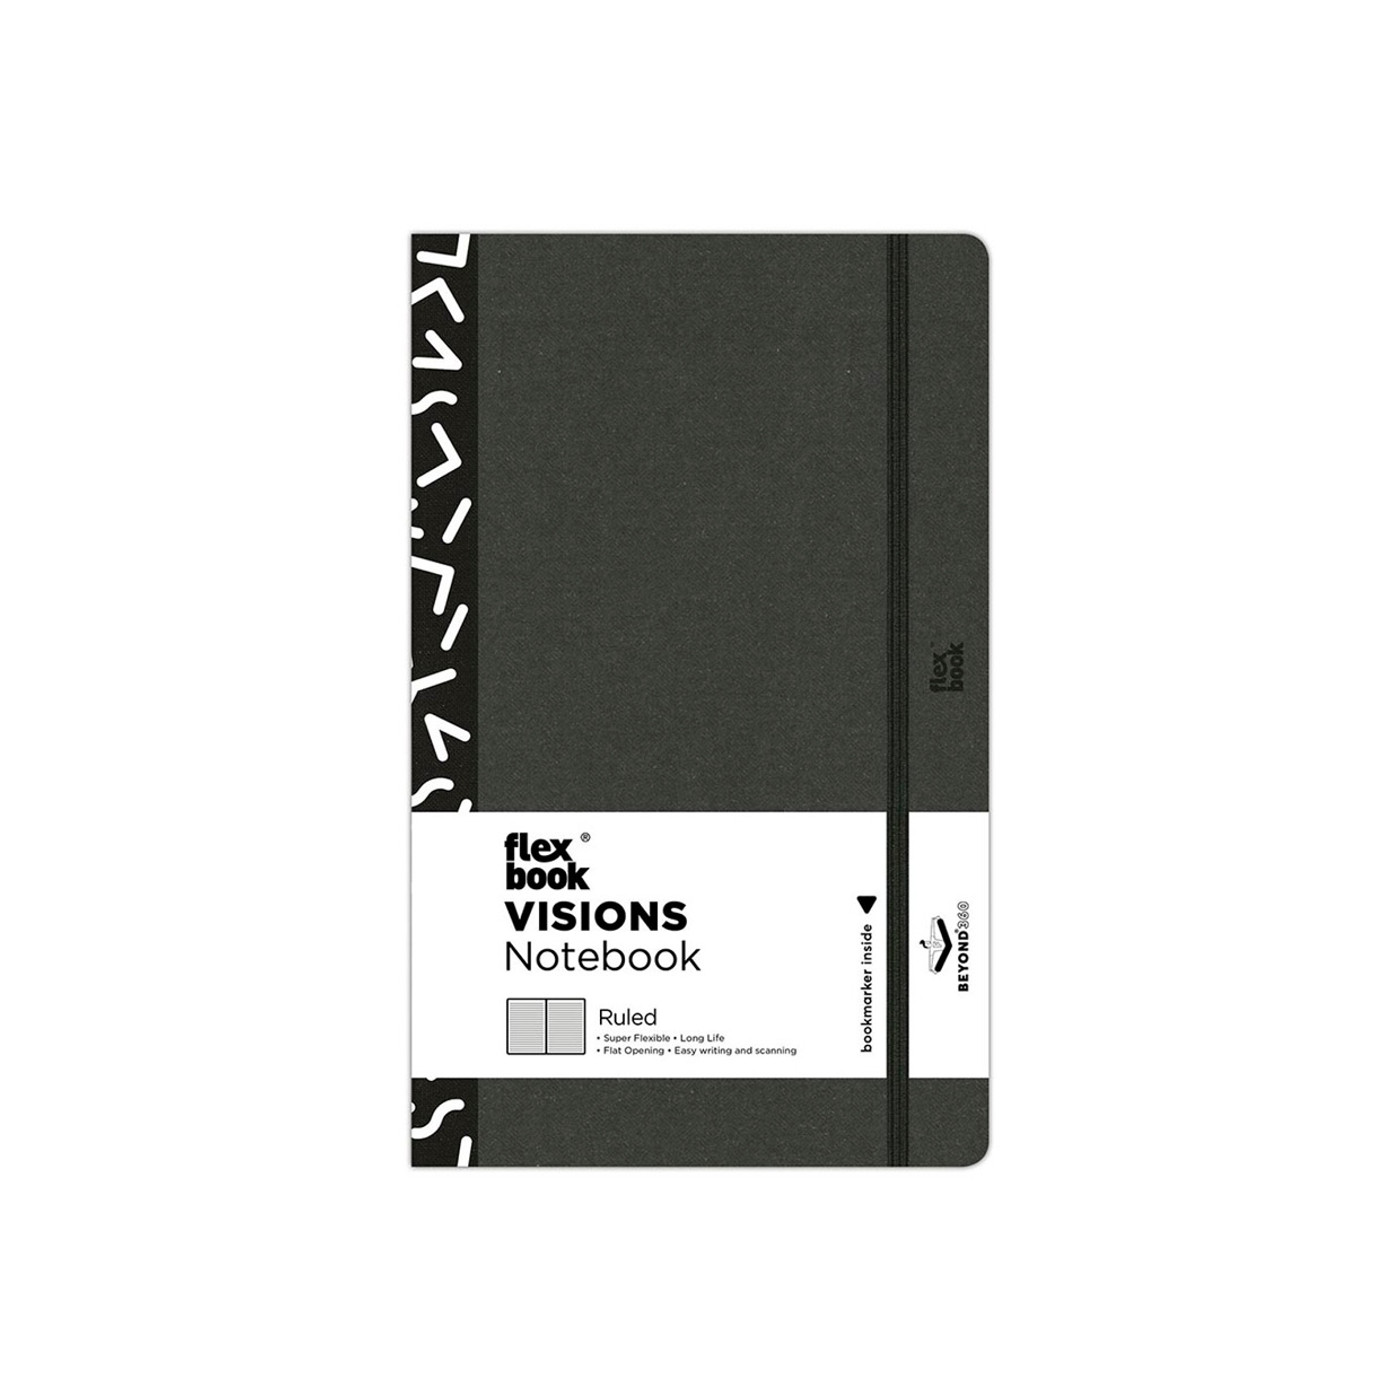 Flexbook - Visions notebook - A5 - LINED